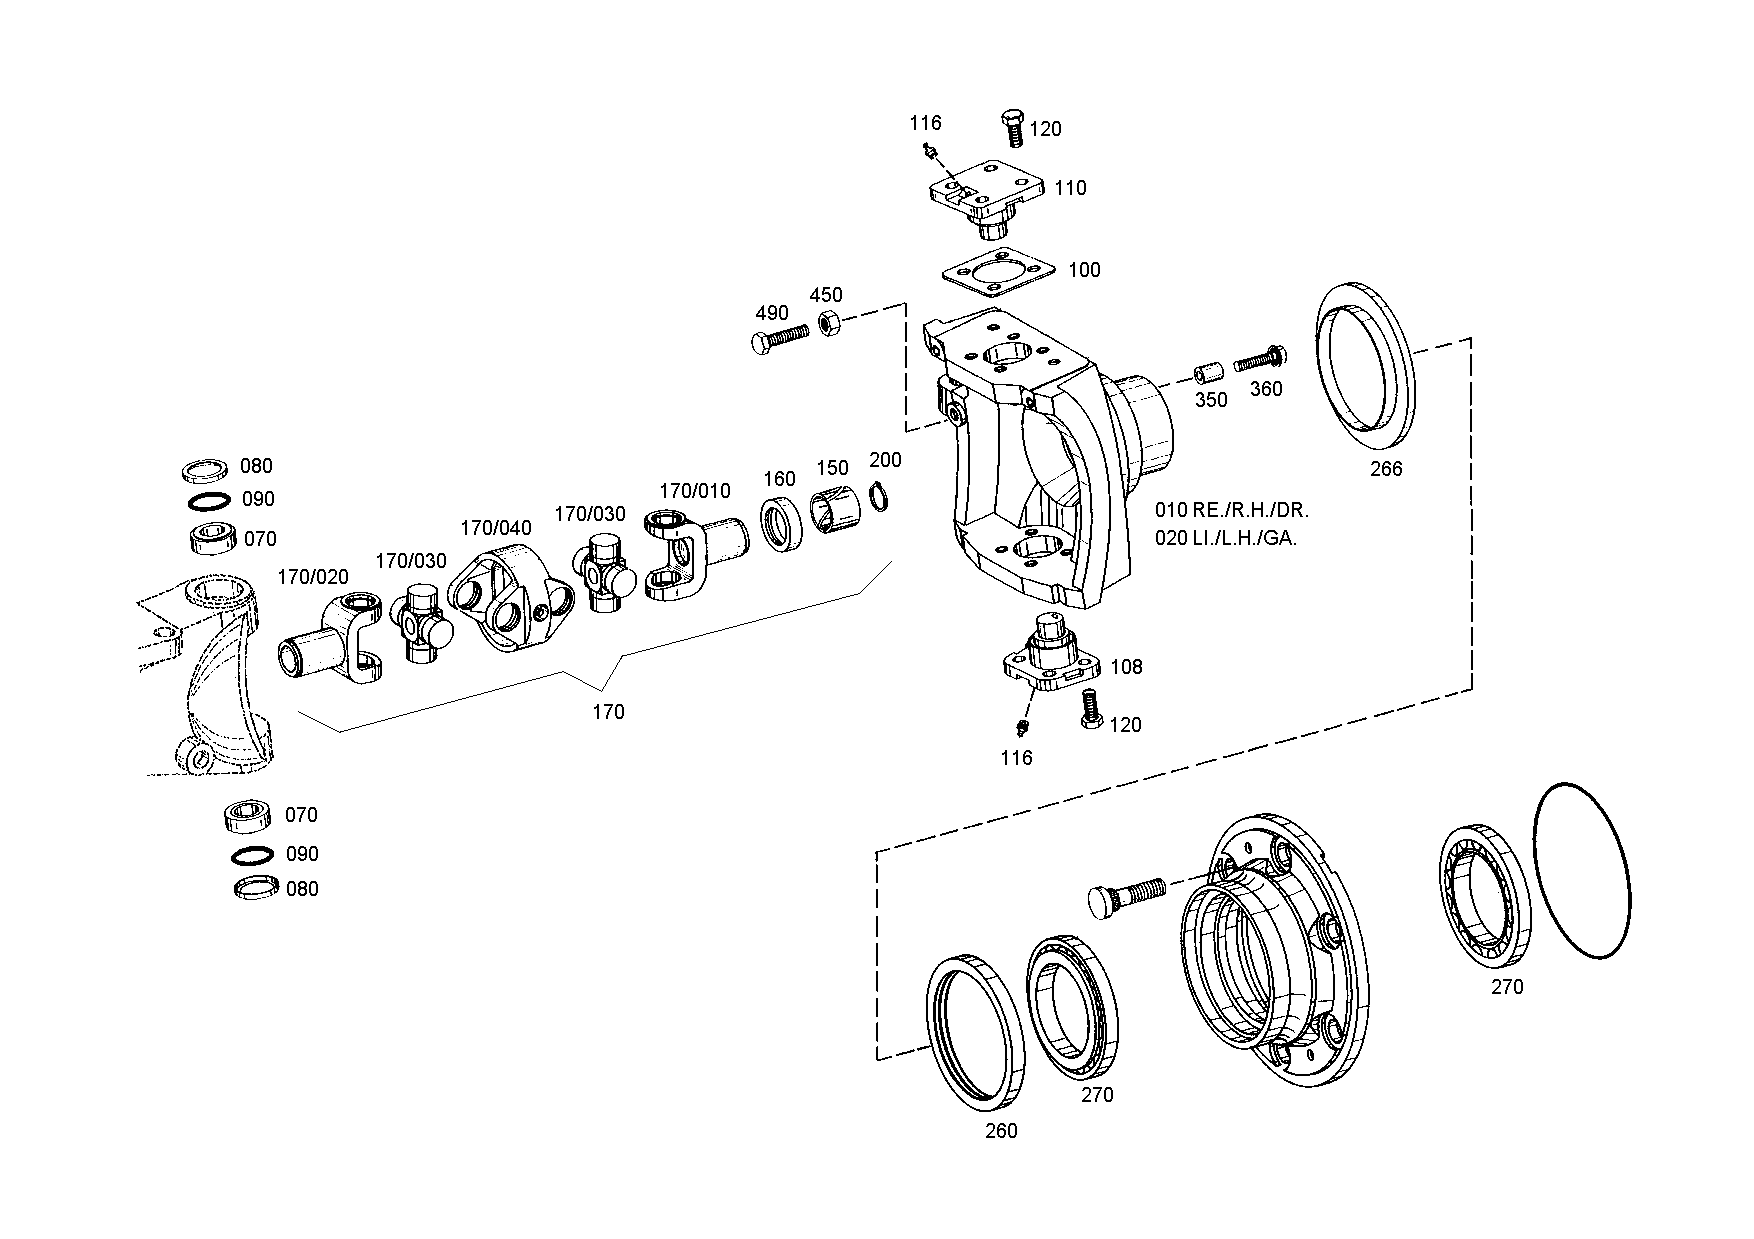 drawing for BEISSBARTH & MUELLER GMBH & CO. L40552 - LUBRICATING NIPPLE (figure 3)